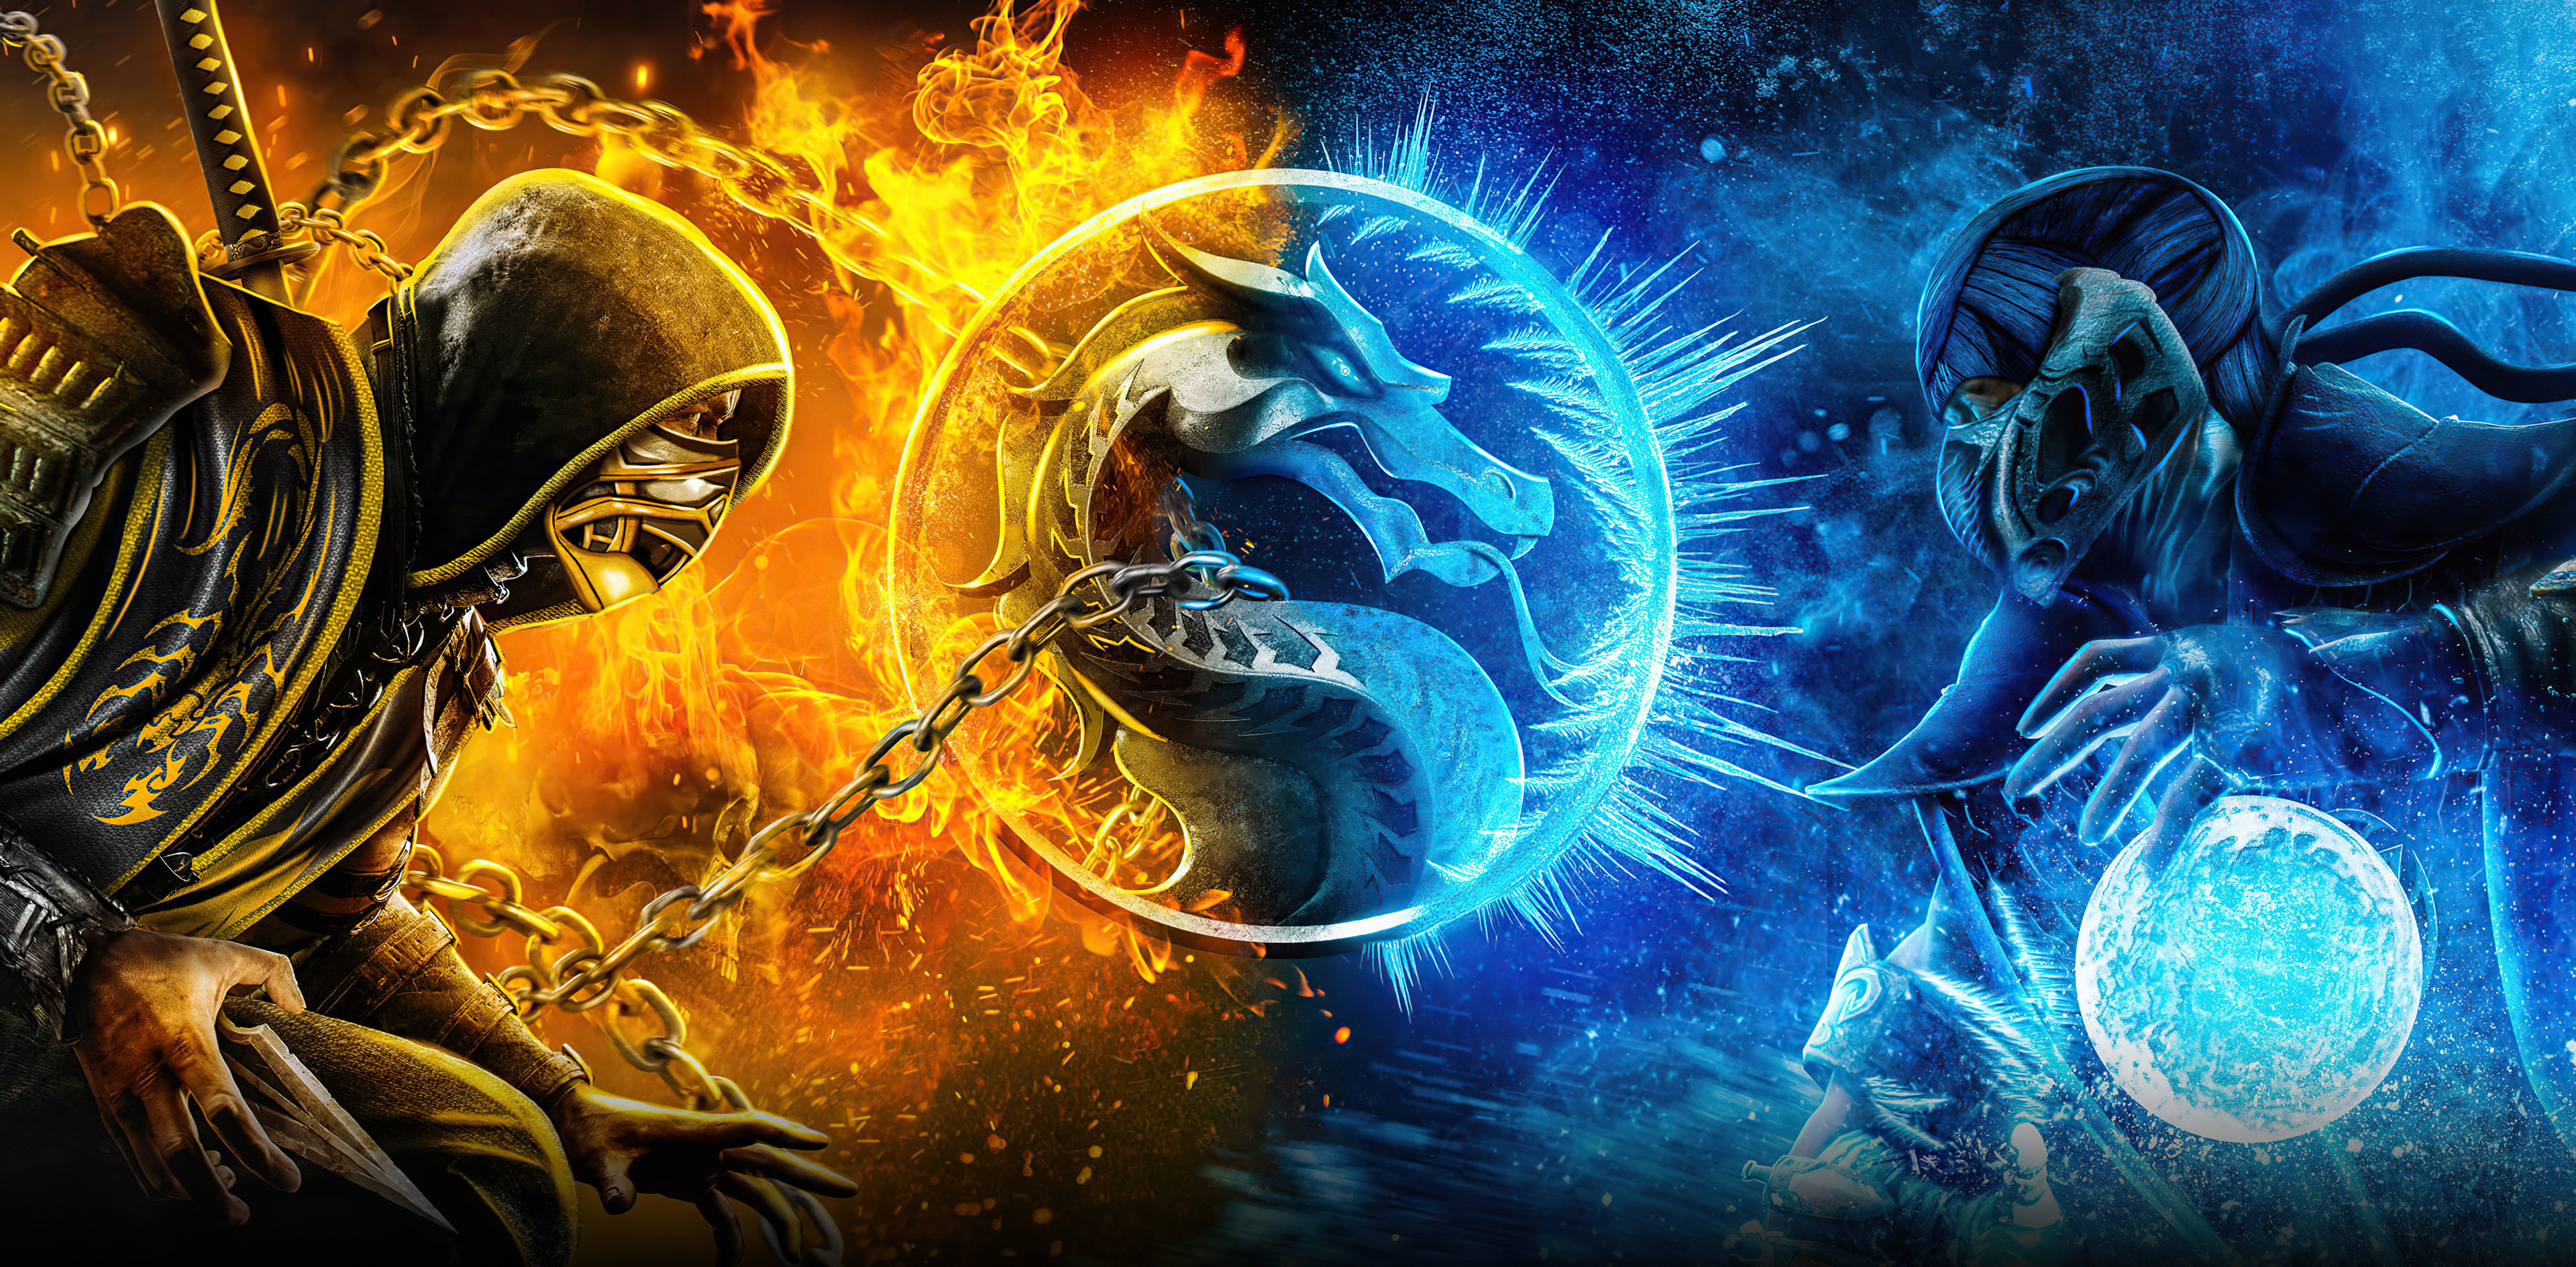 480 Mortal Kombat HD Wallpapers and Backgrounds